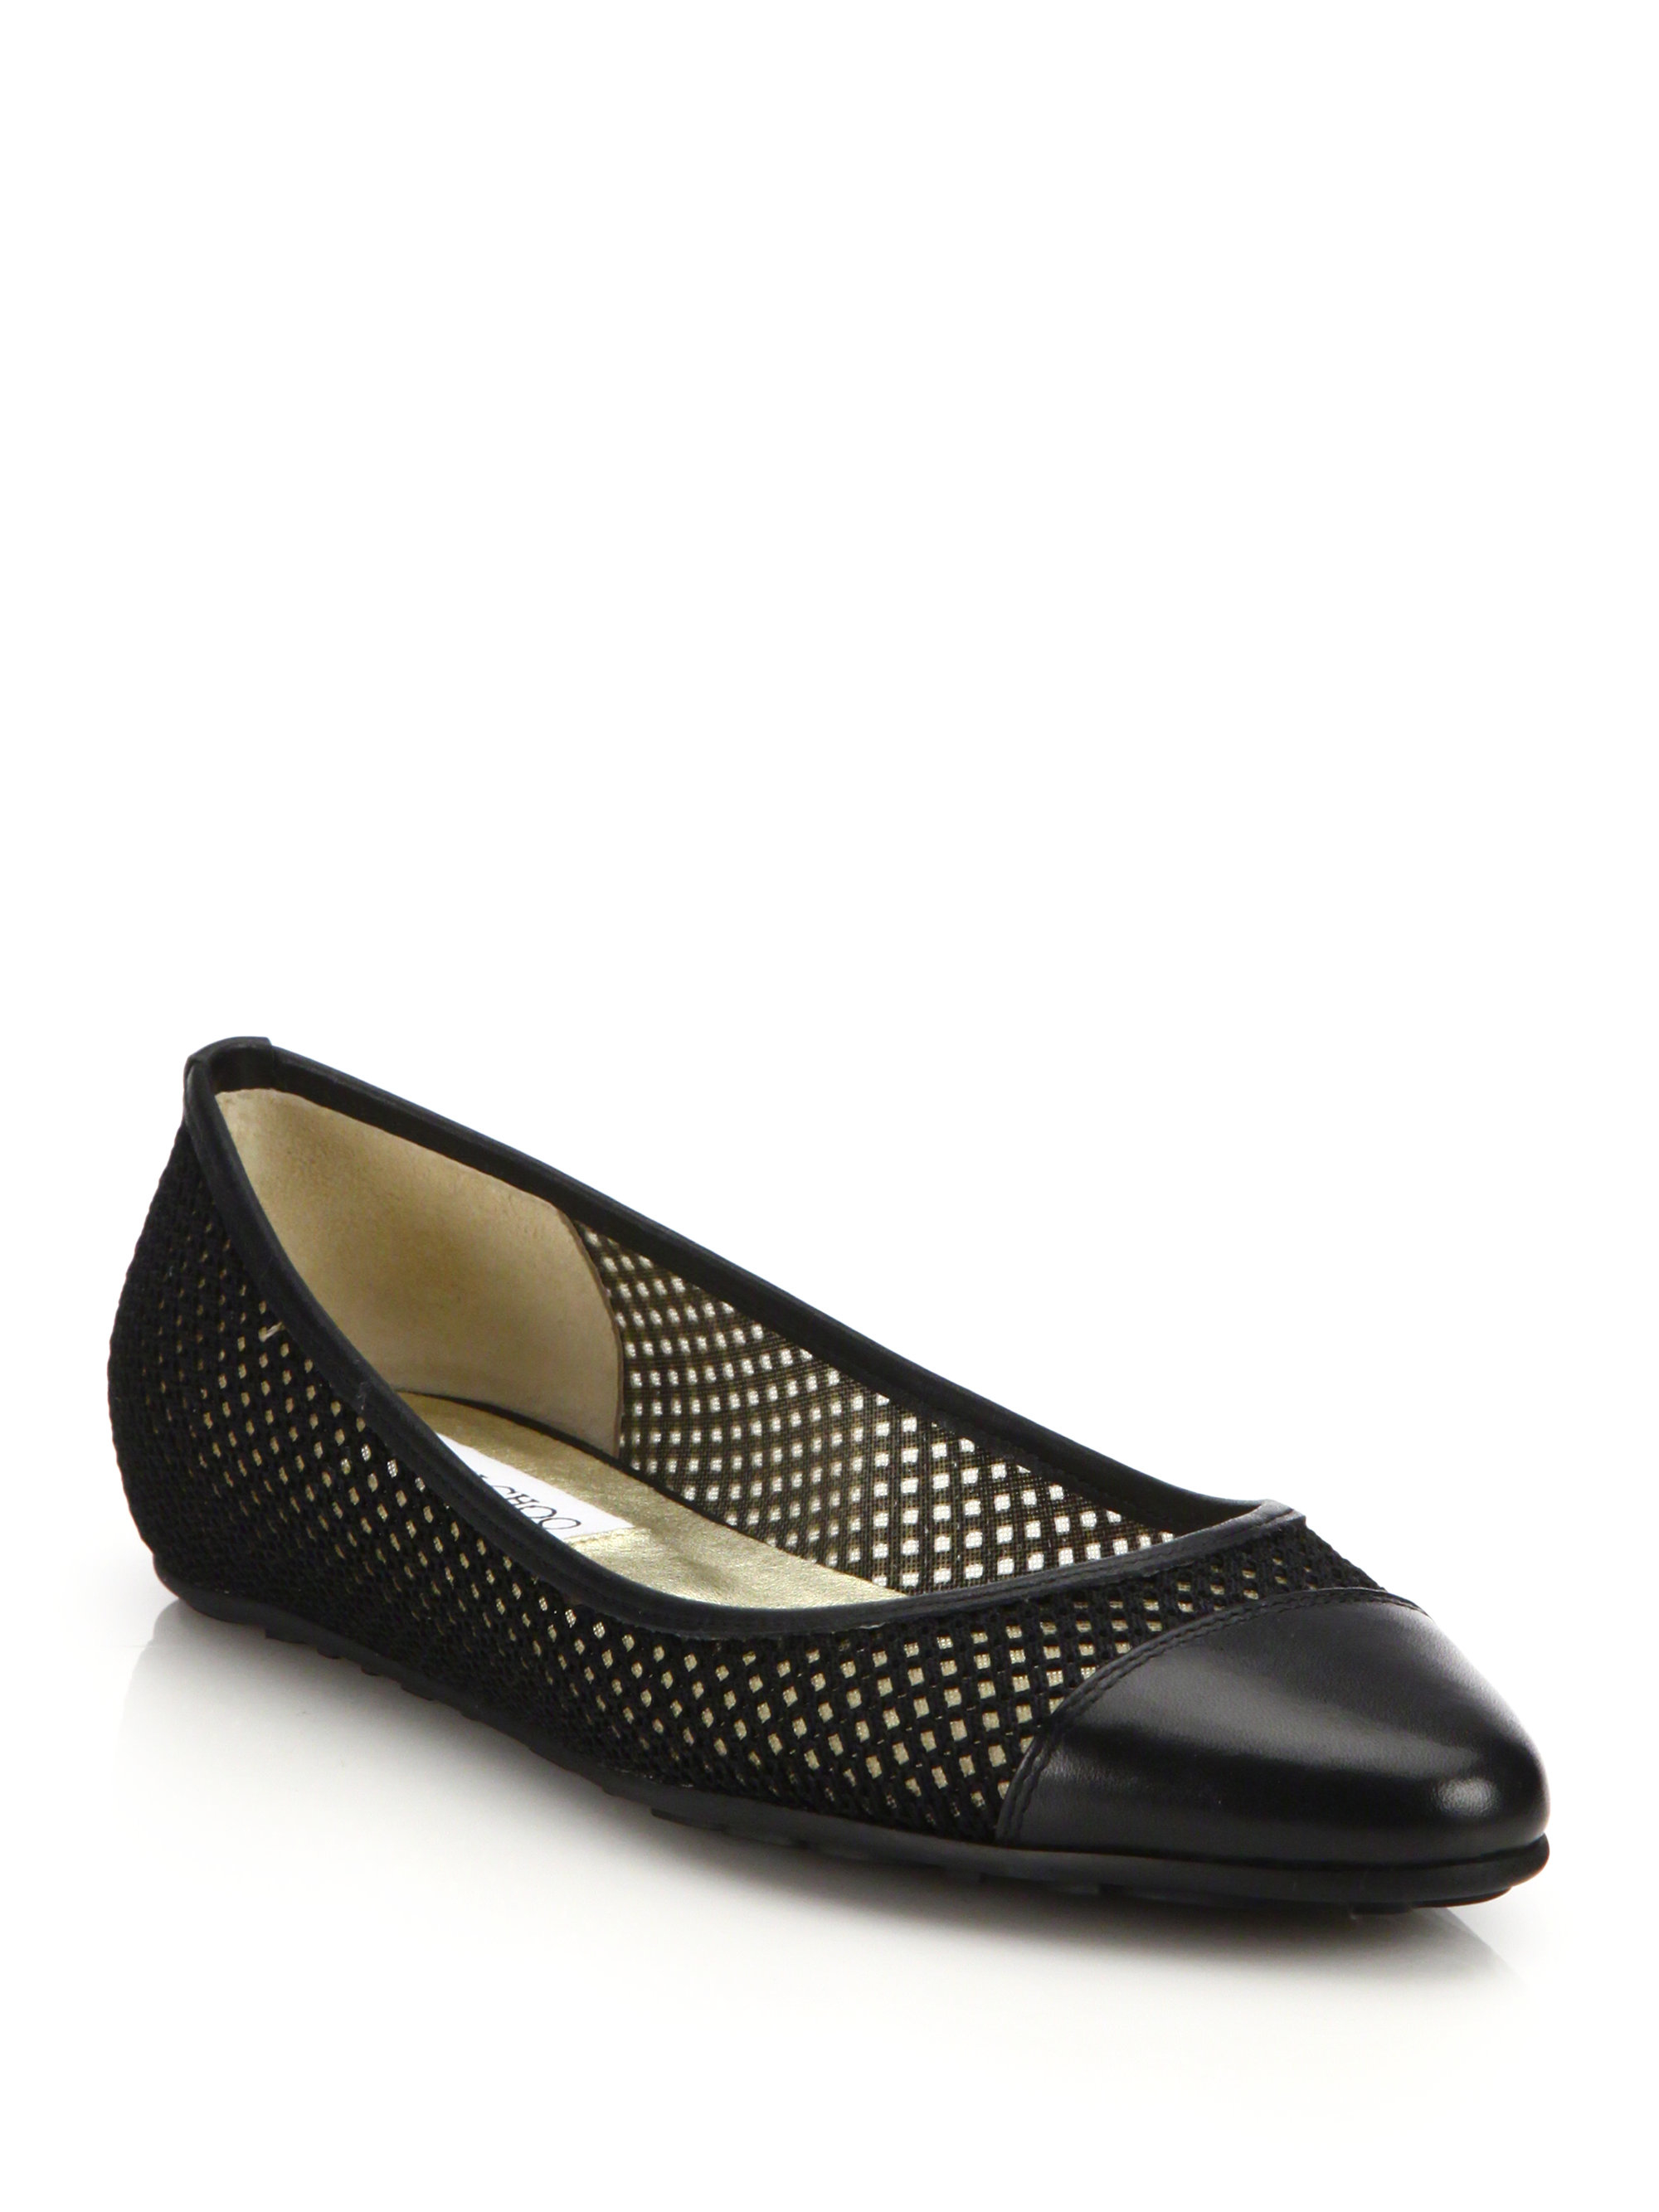 Lyst - Jimmy Choo Waine Mesh and Leather Ballet Flats in Black